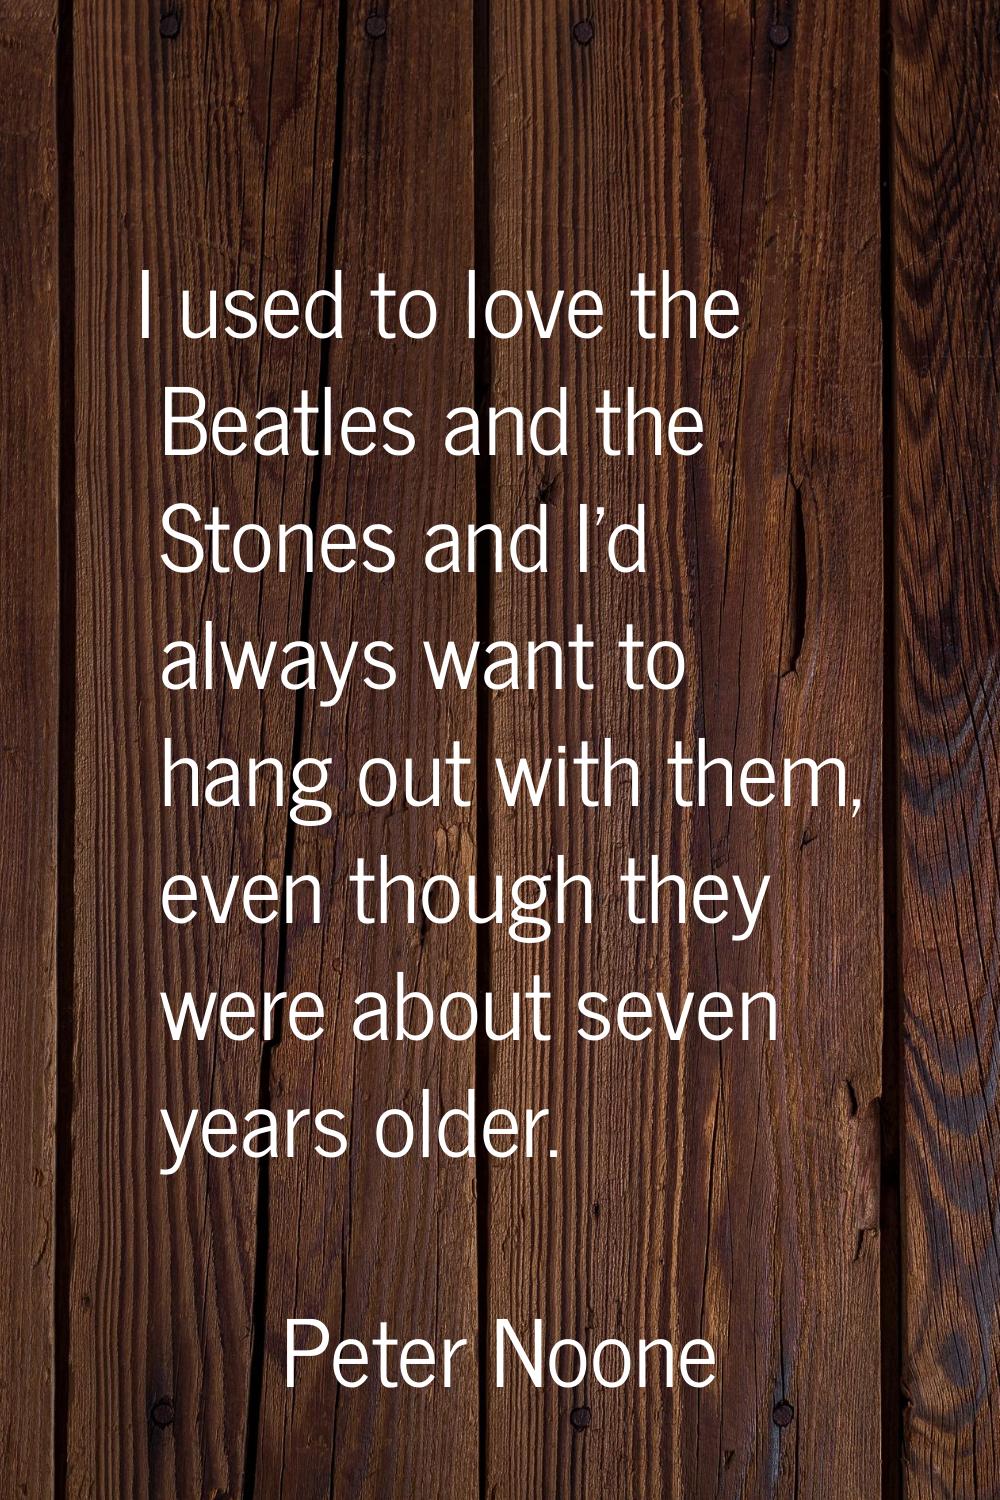 I used to love the Beatles and the Stones and I'd always want to hang out with them, even though th